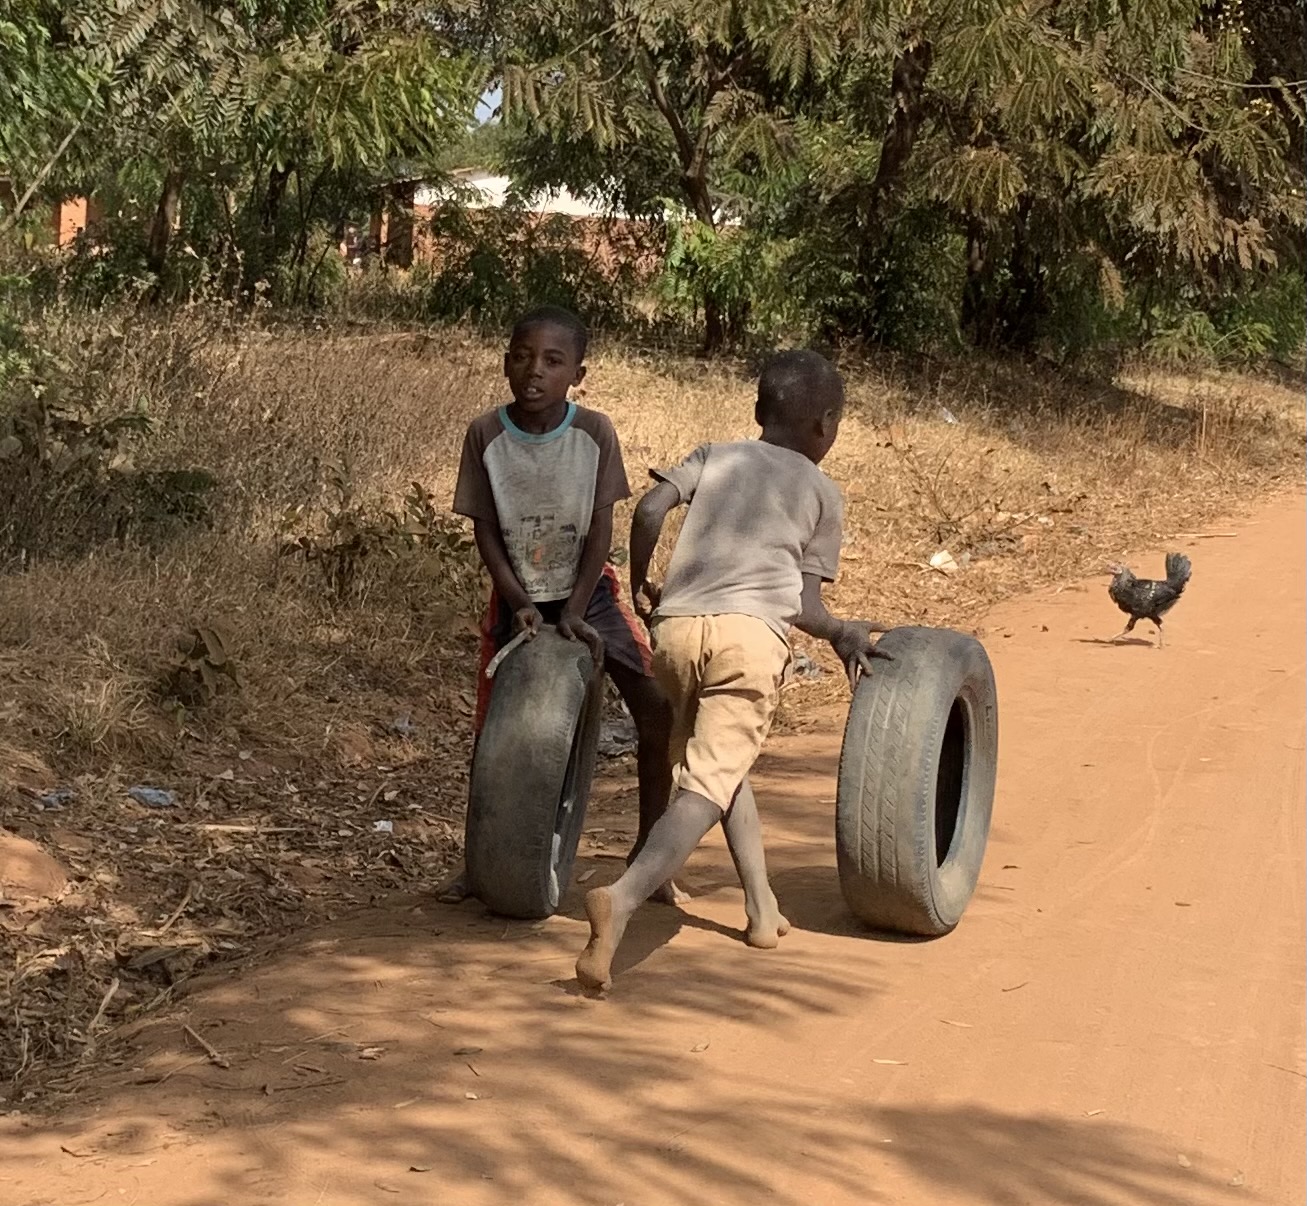 Young boys playing with tires